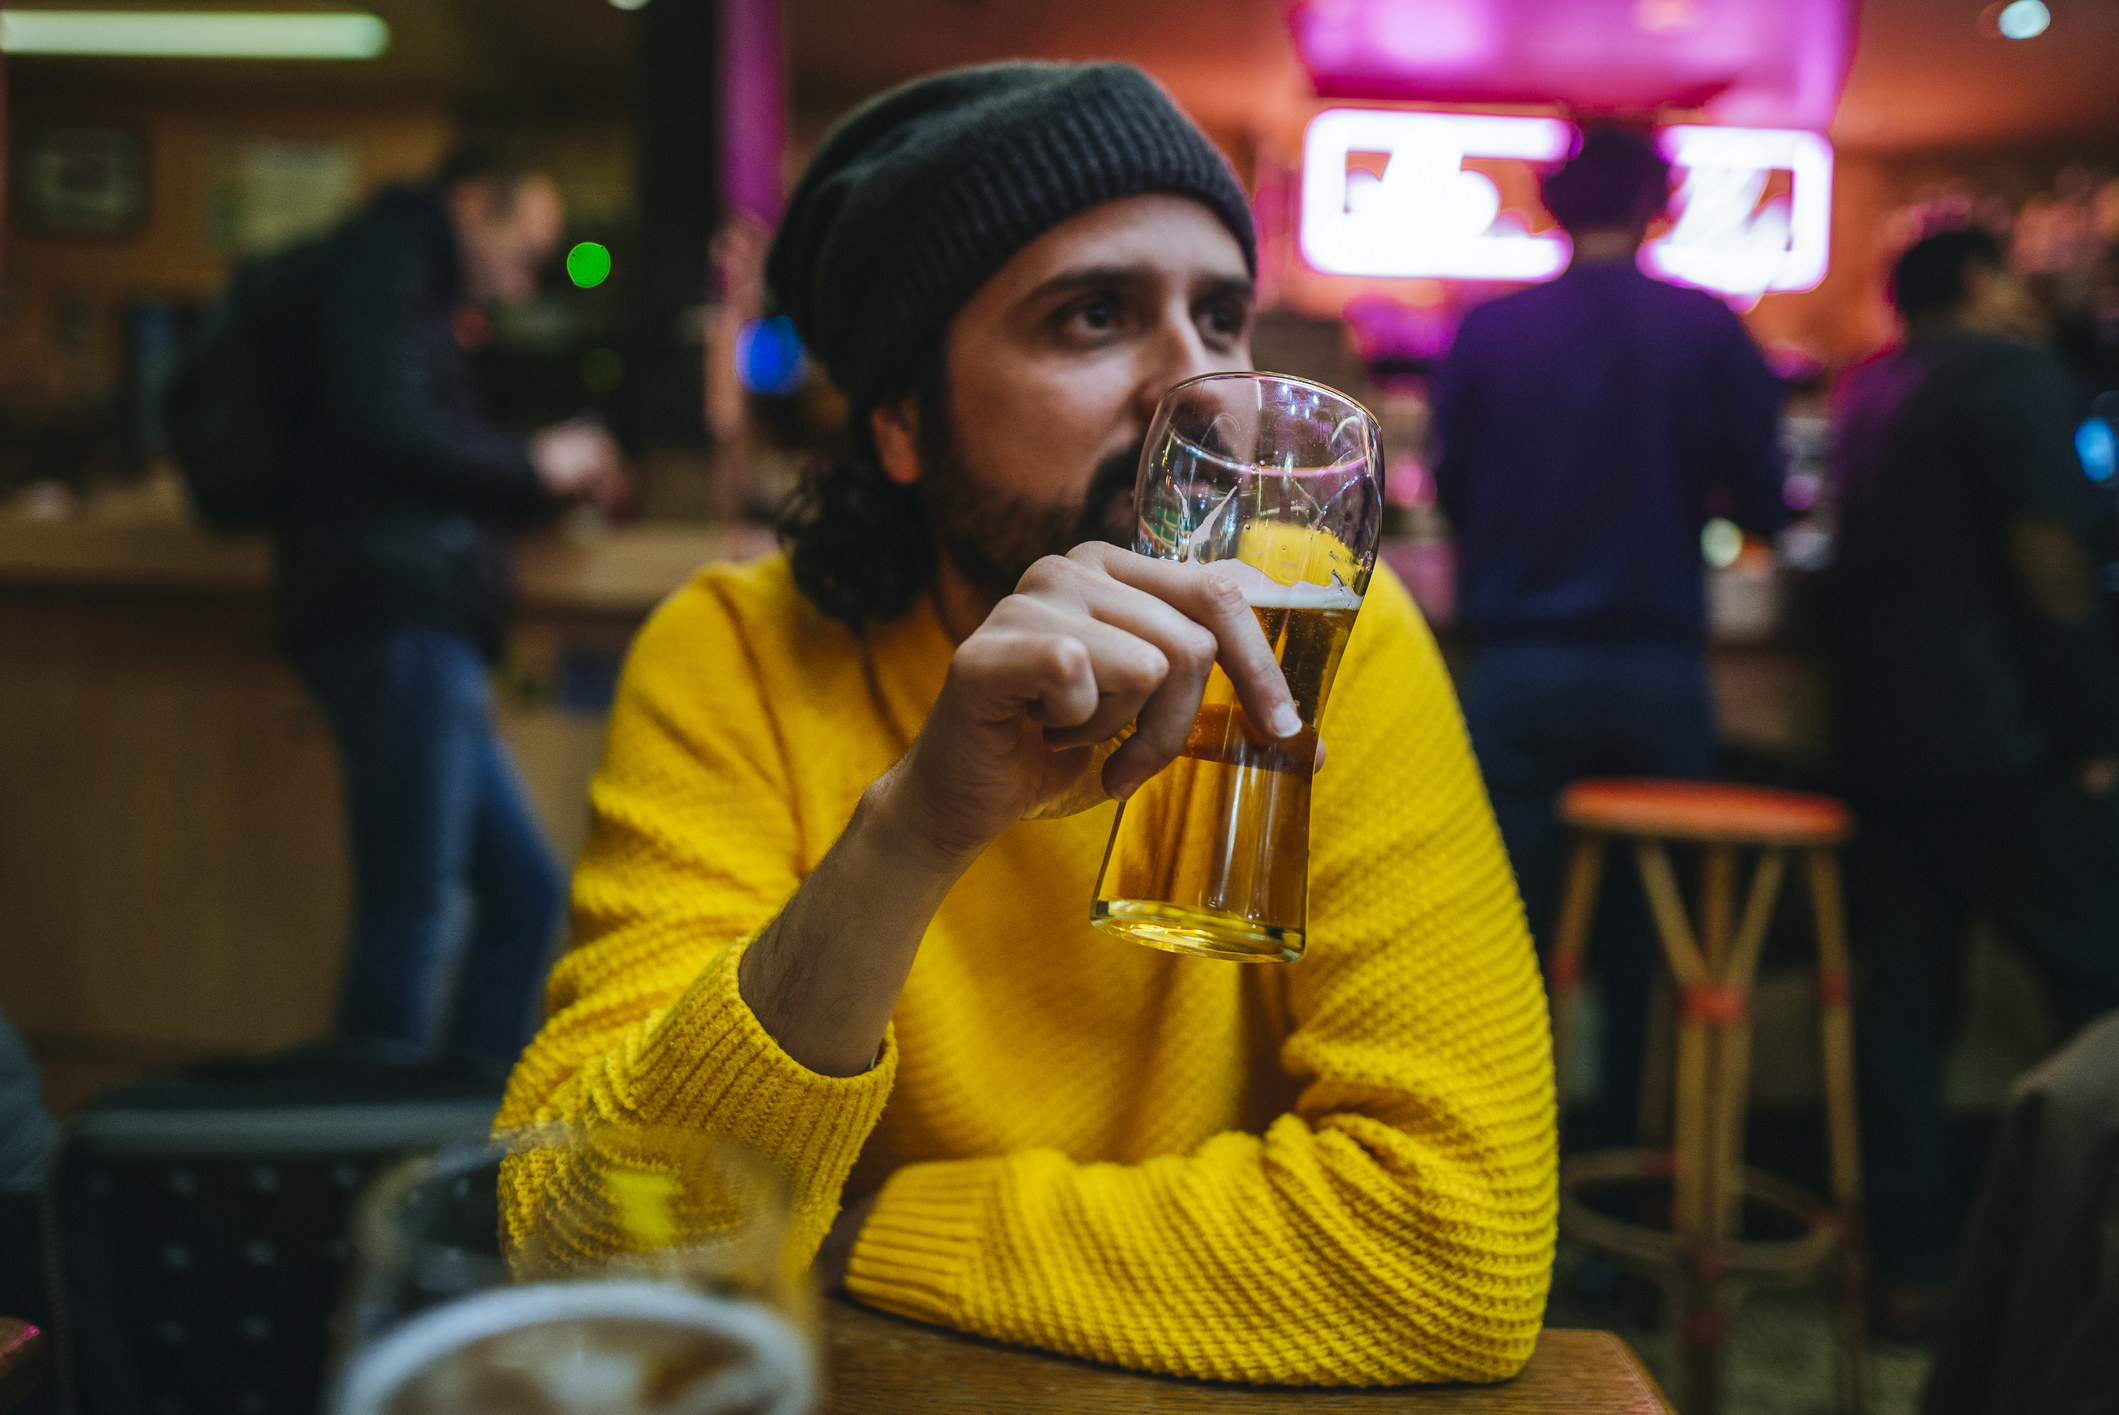 A man drinking a beer in a bar